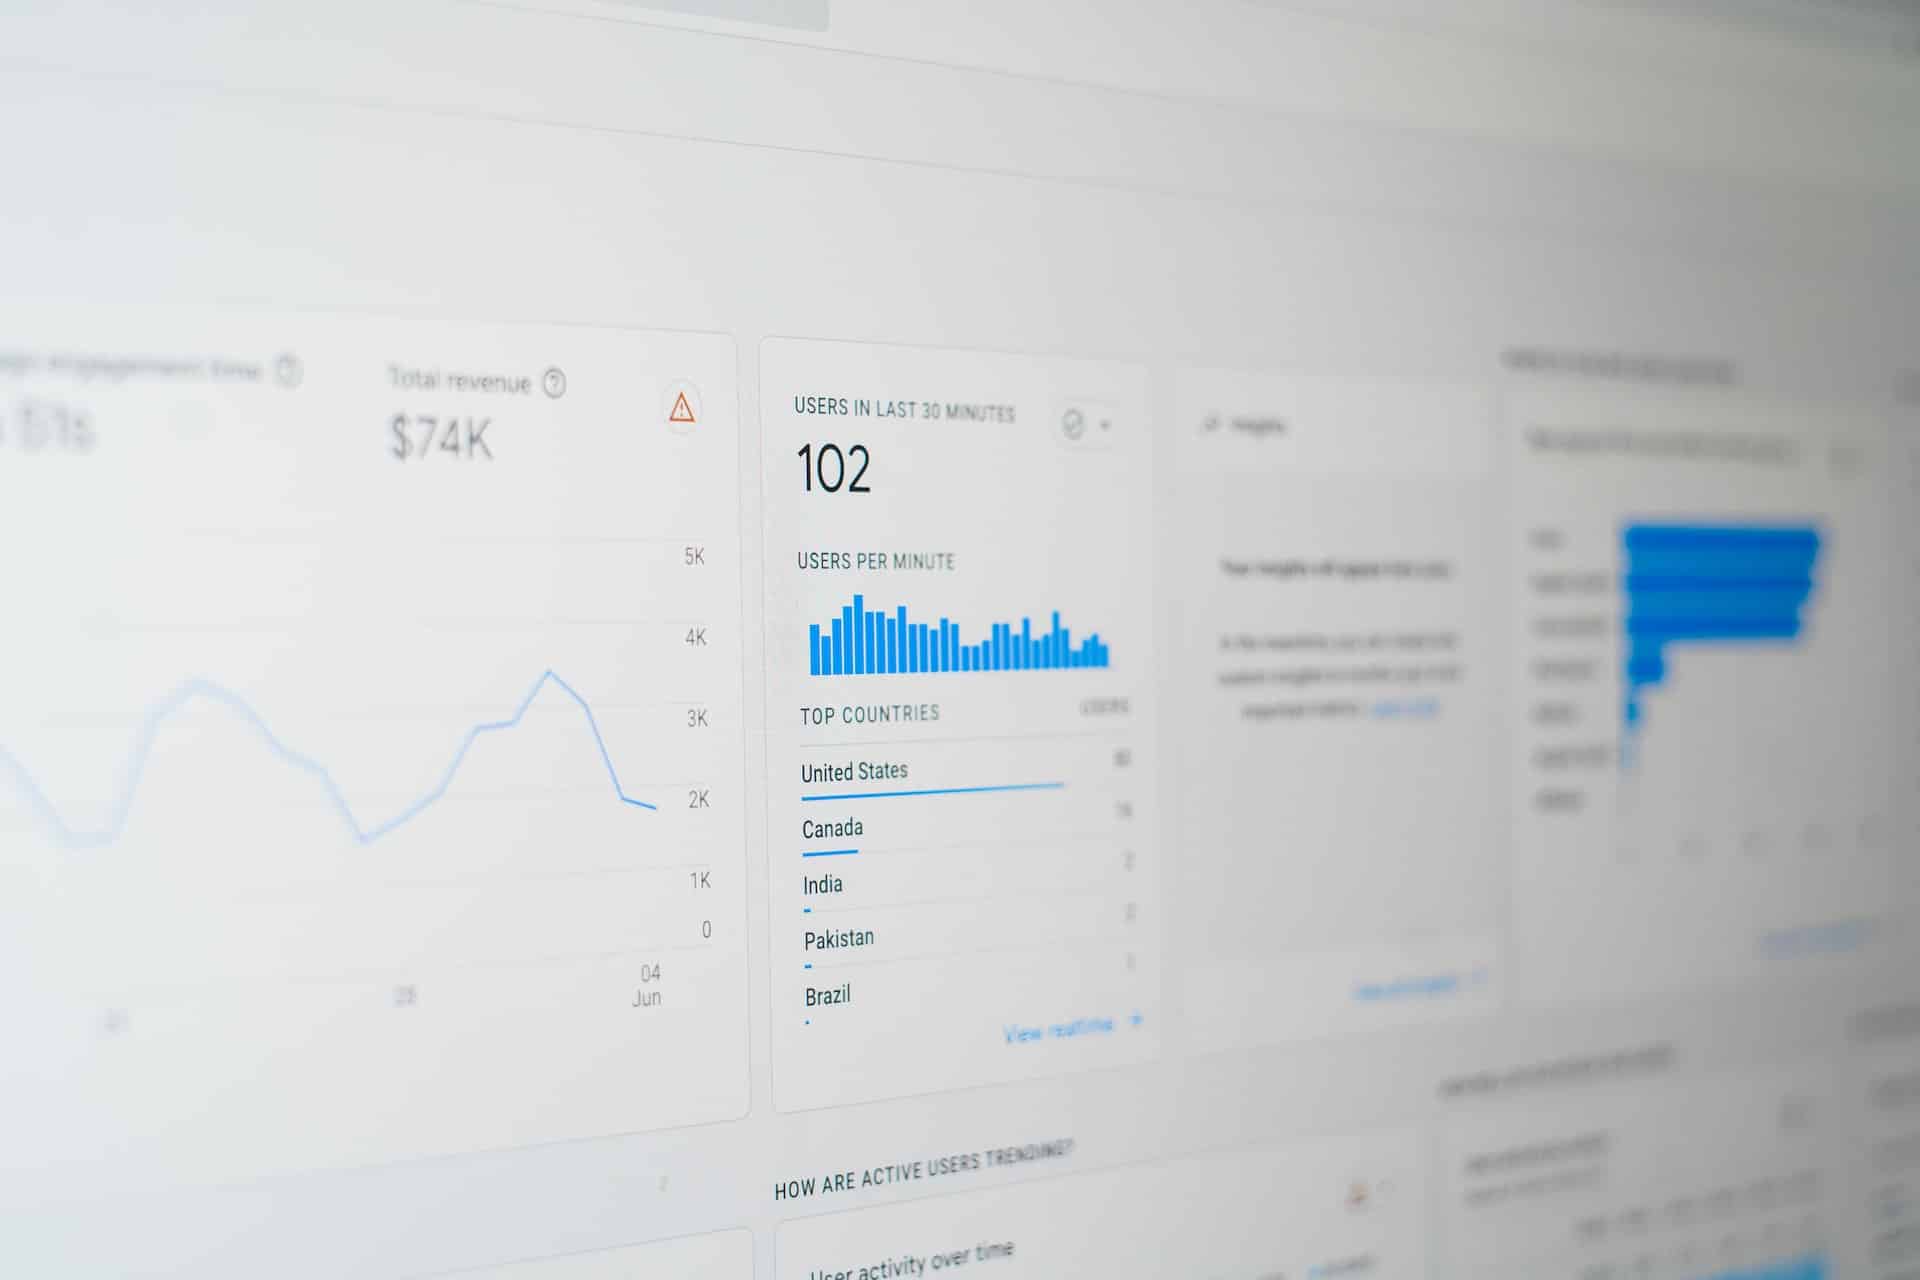 Don't forget to measure and track your Saas business performance to gain actionable insights for your future campaigns.